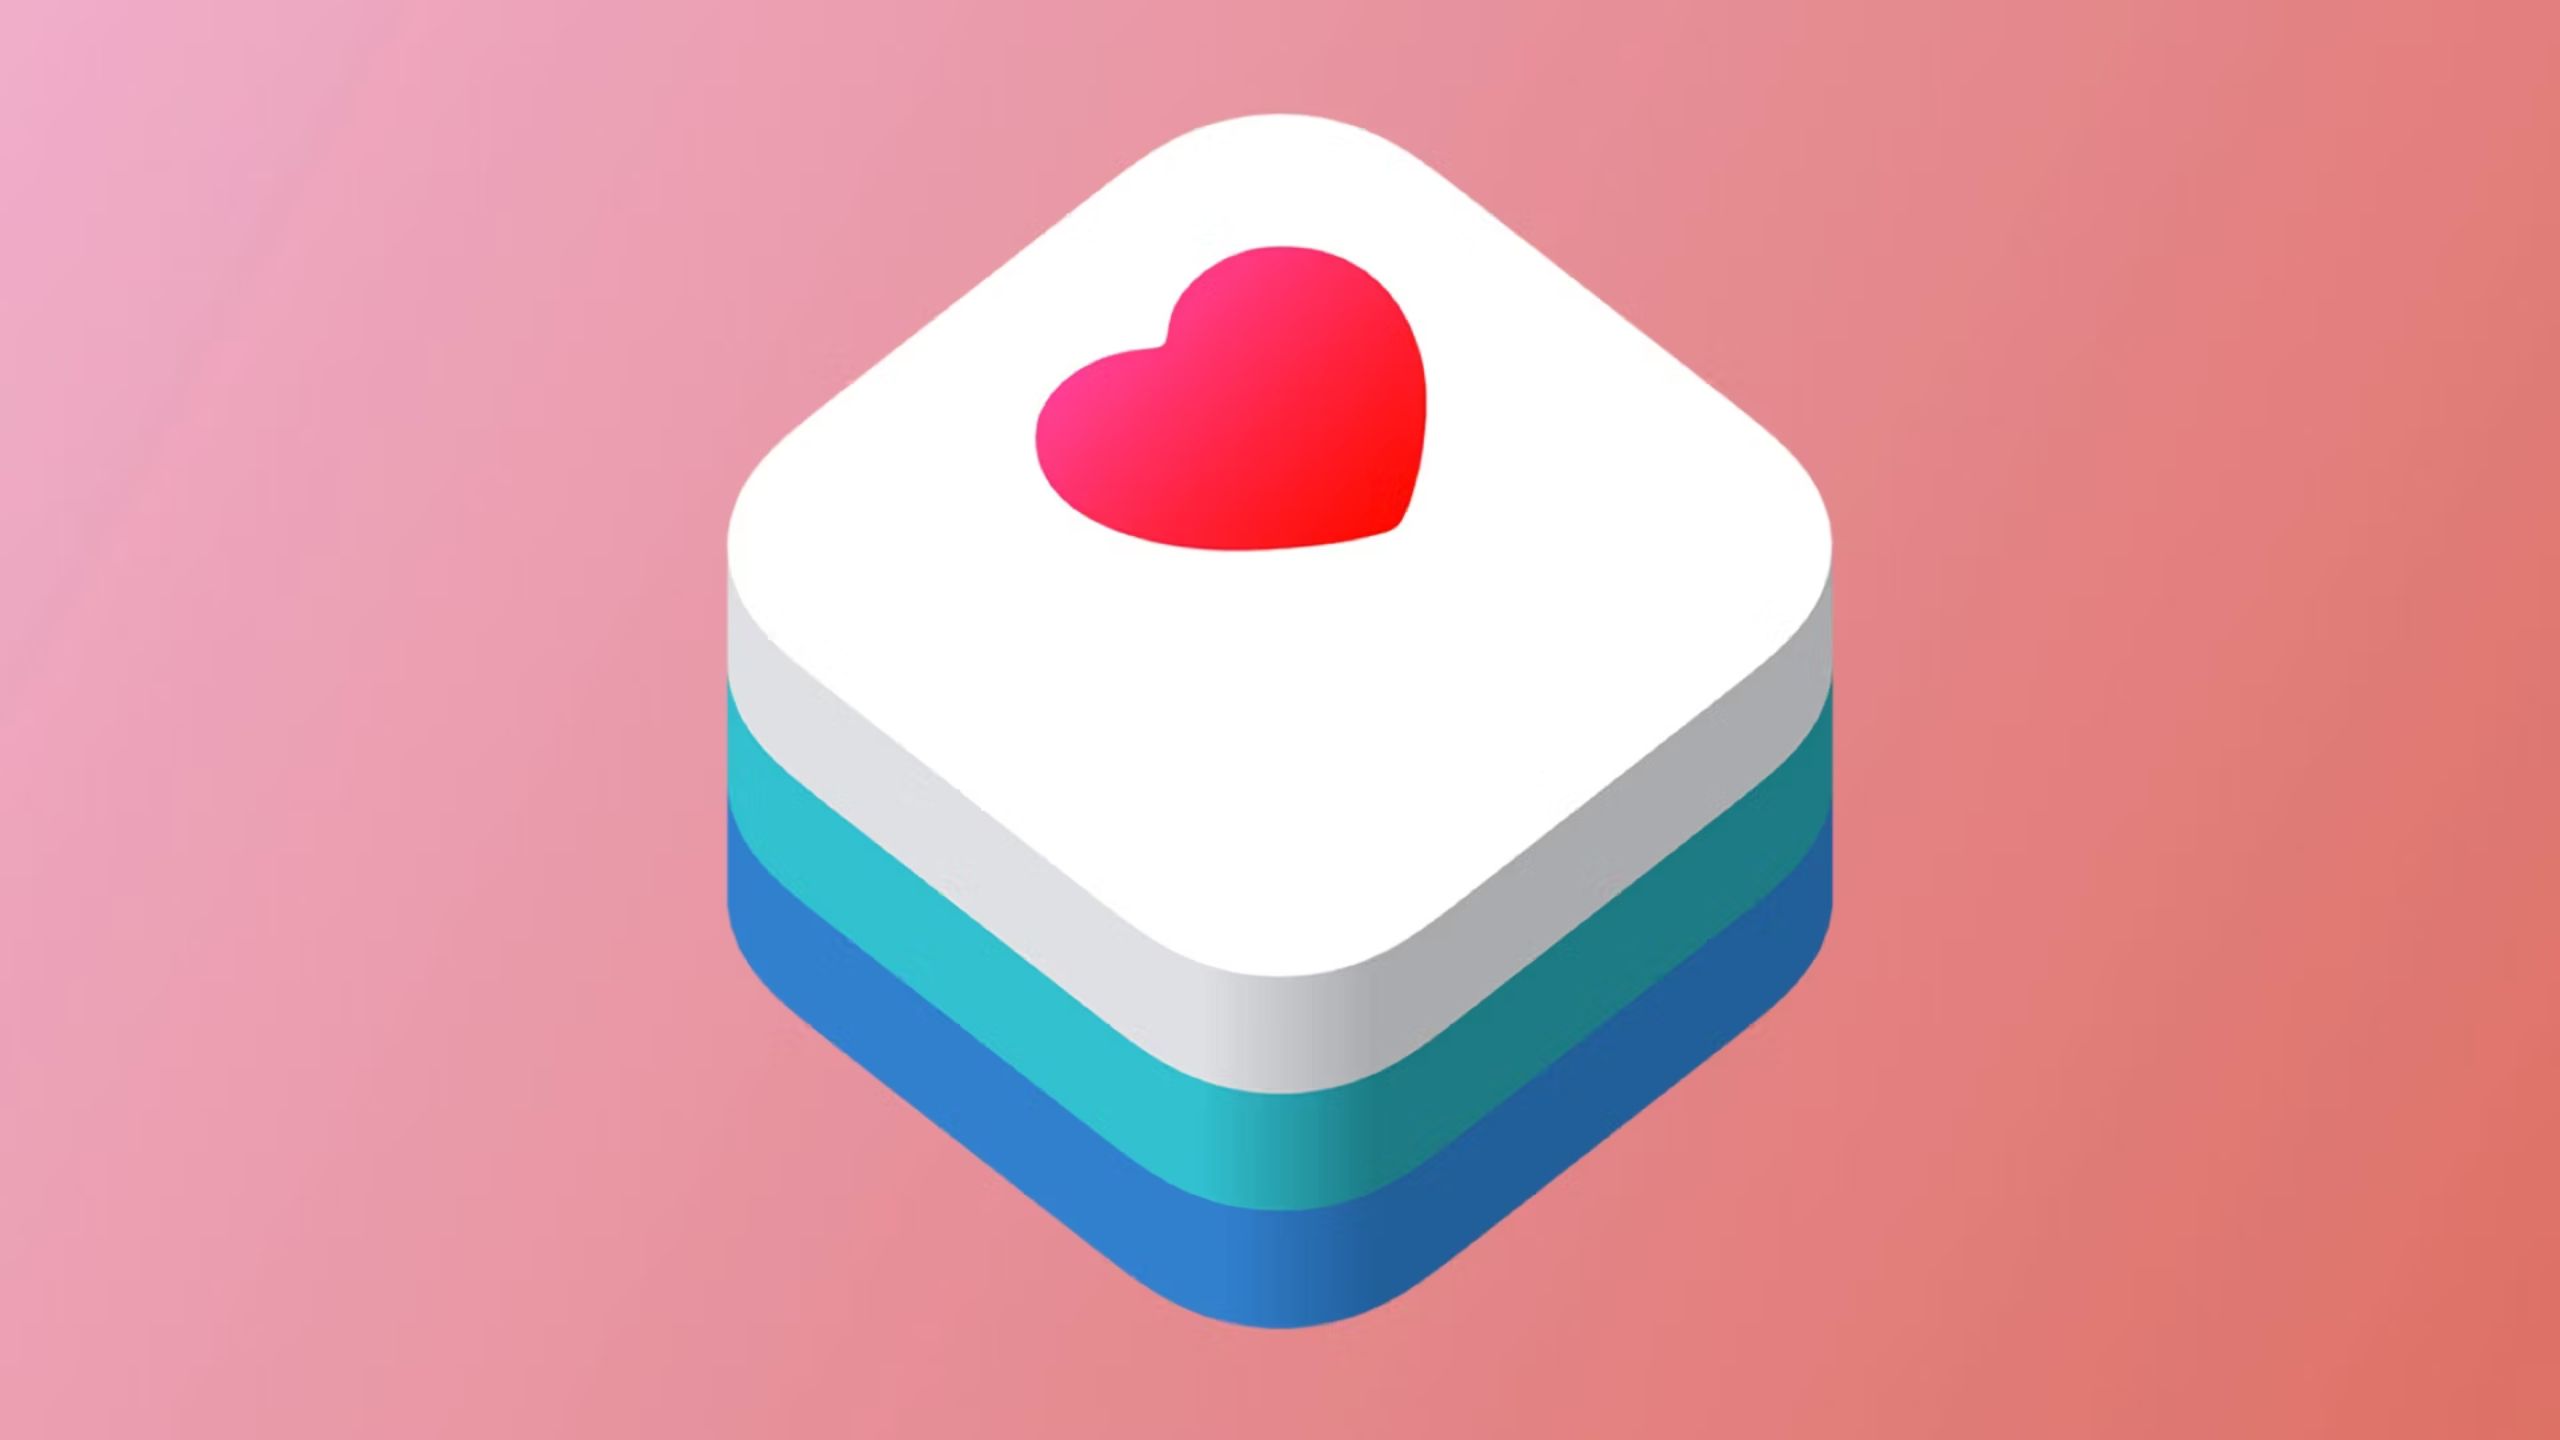 The Apple HealthKit logo against a pink background